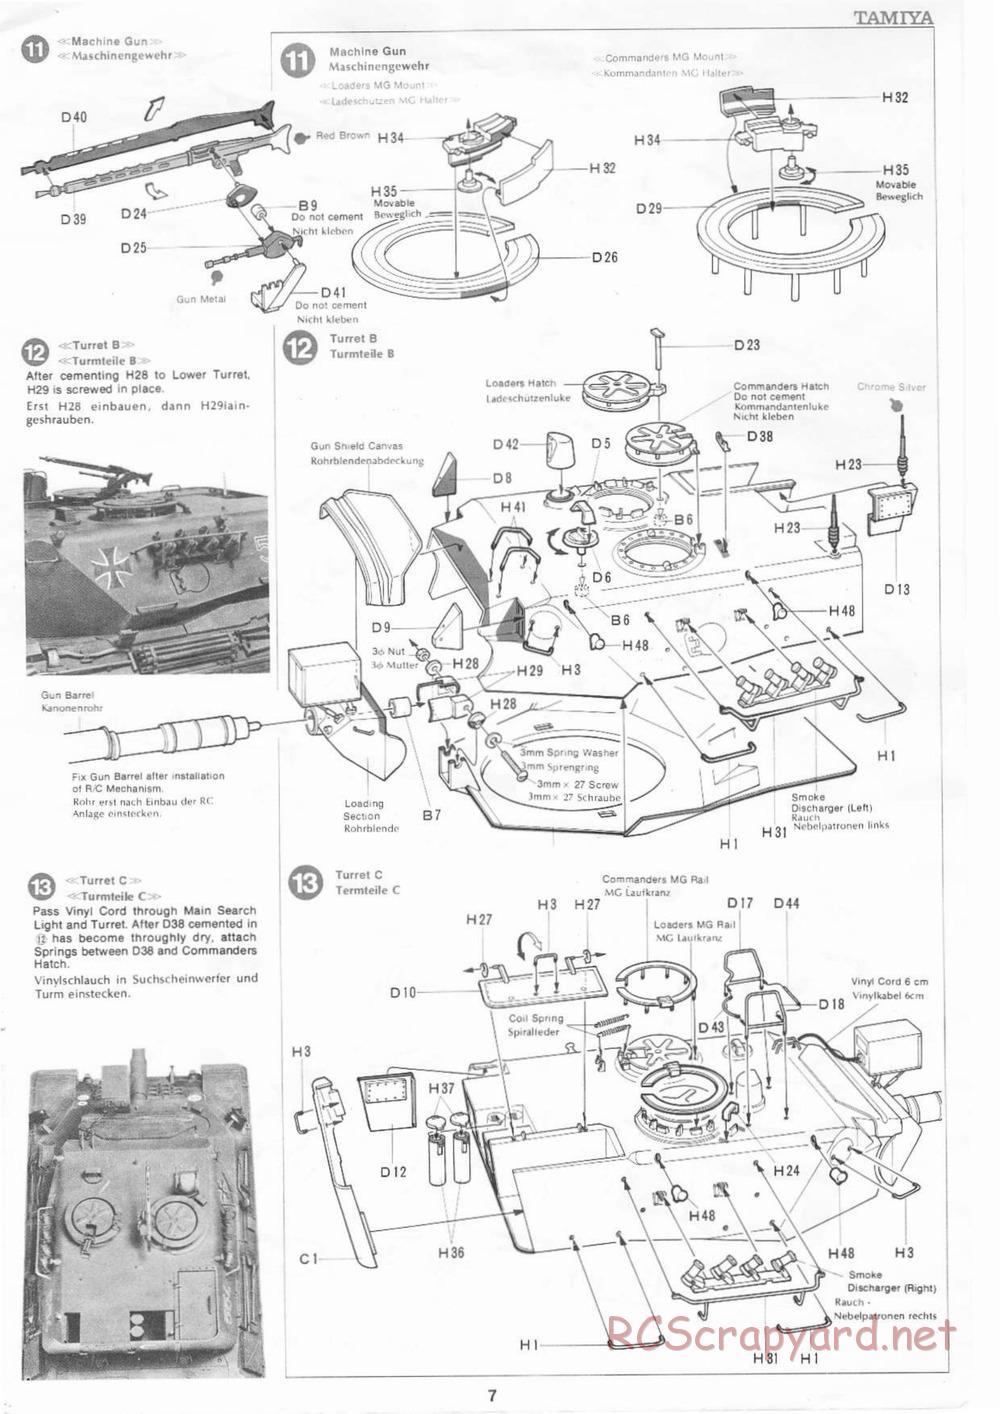 Tamiya - Leopard A4 - 1/16 Scale Chassis - Manual - Page 7